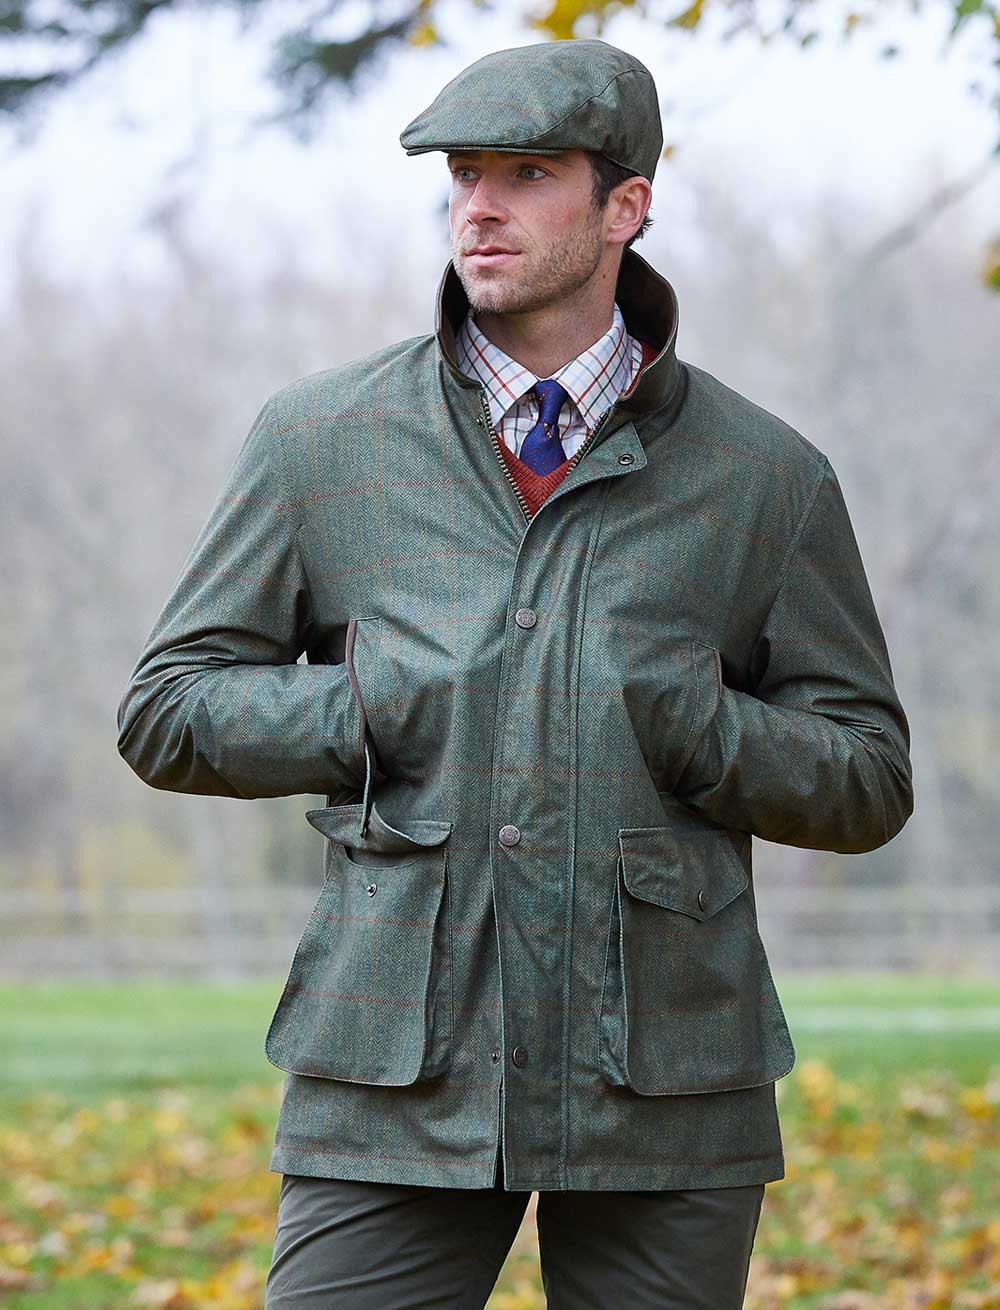 Men's Outdoor Country Clothing: Practical & Affordable Style